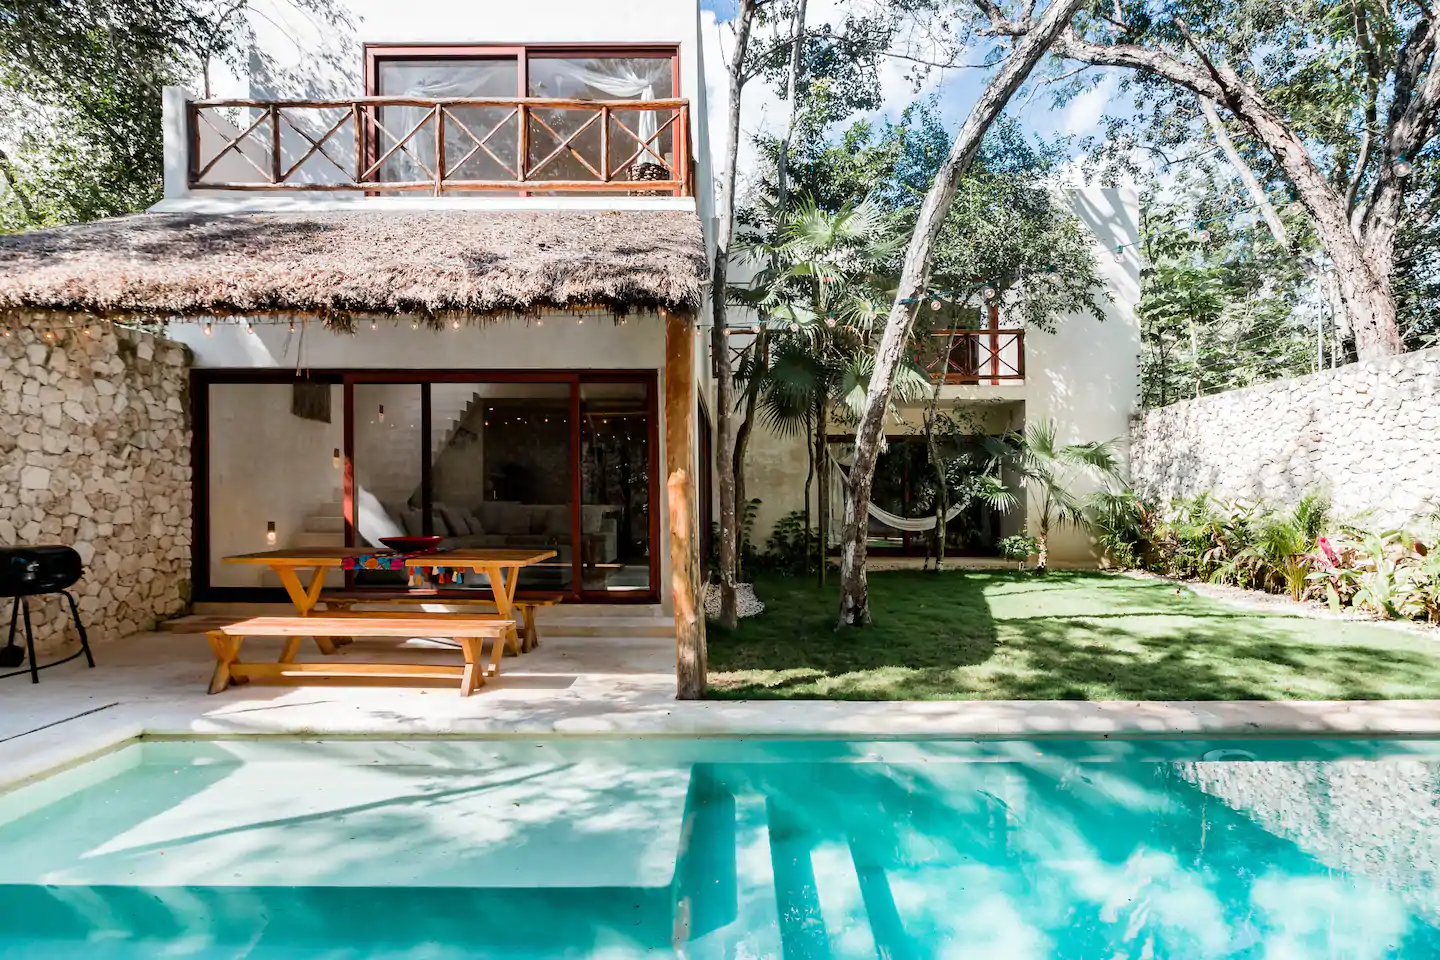 This is one of the best Airbnbs resorts in Tulum. The pool looks so clean and there is a picnic table, BBQ, and hammock visible. 